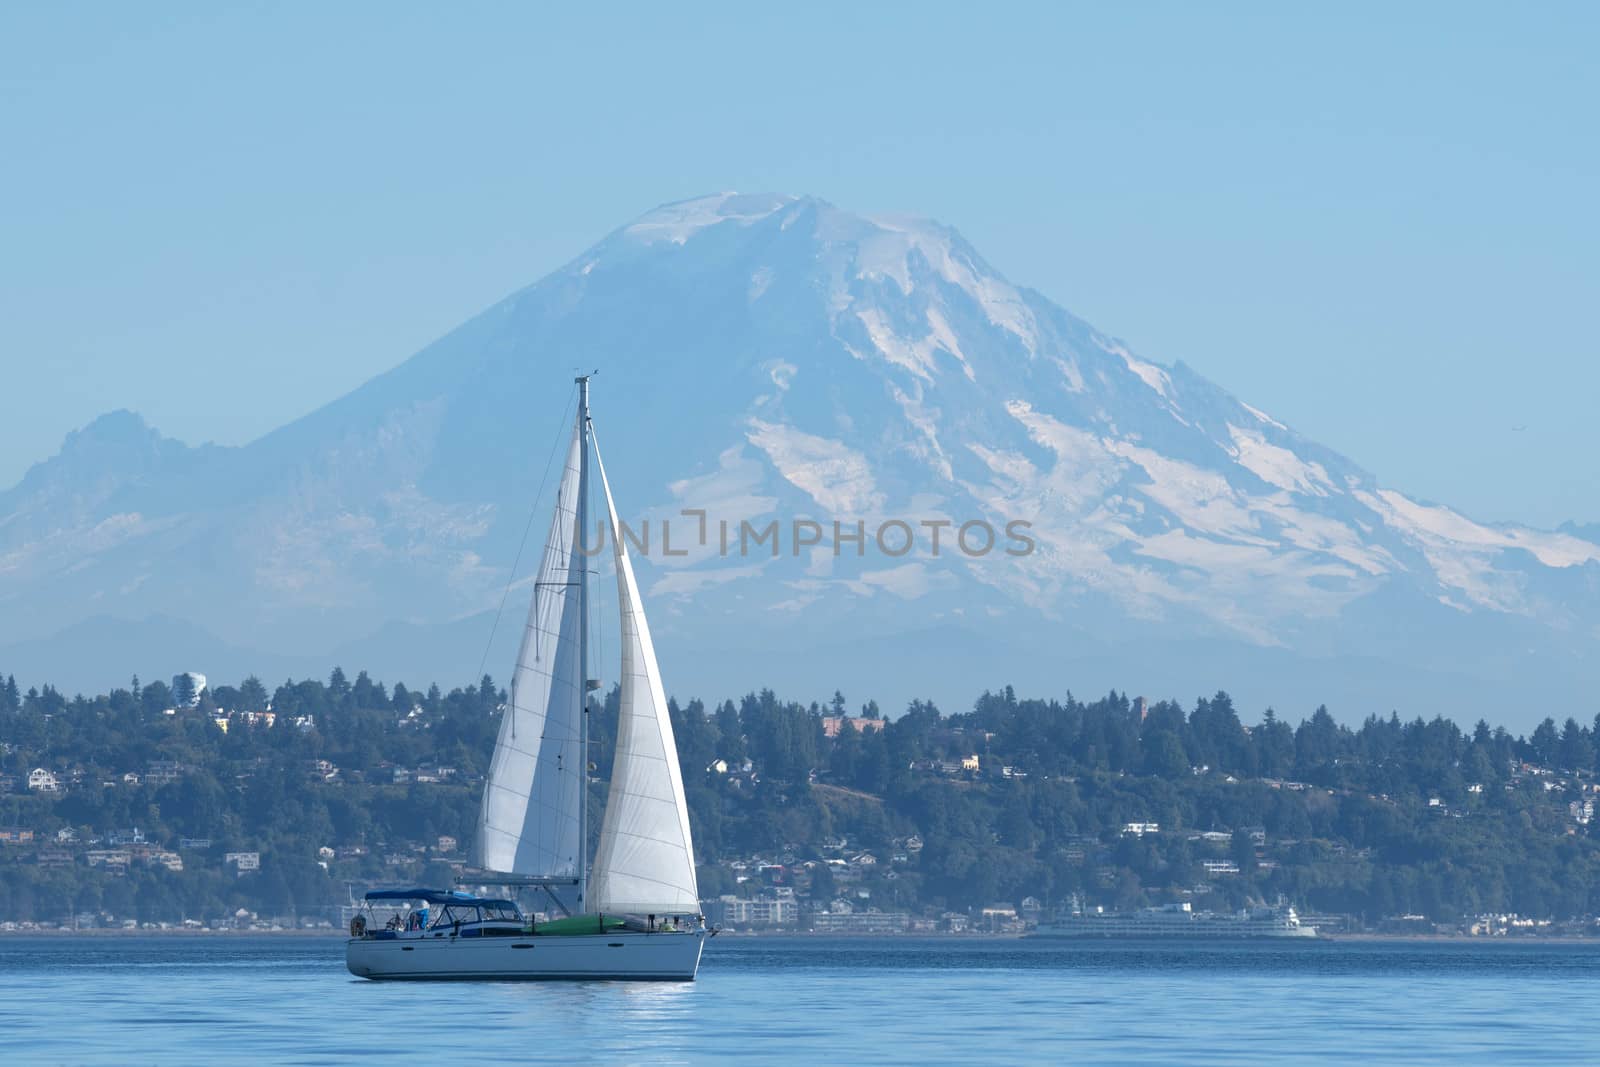 Afternoon sail on Elliott Bay by cestes001